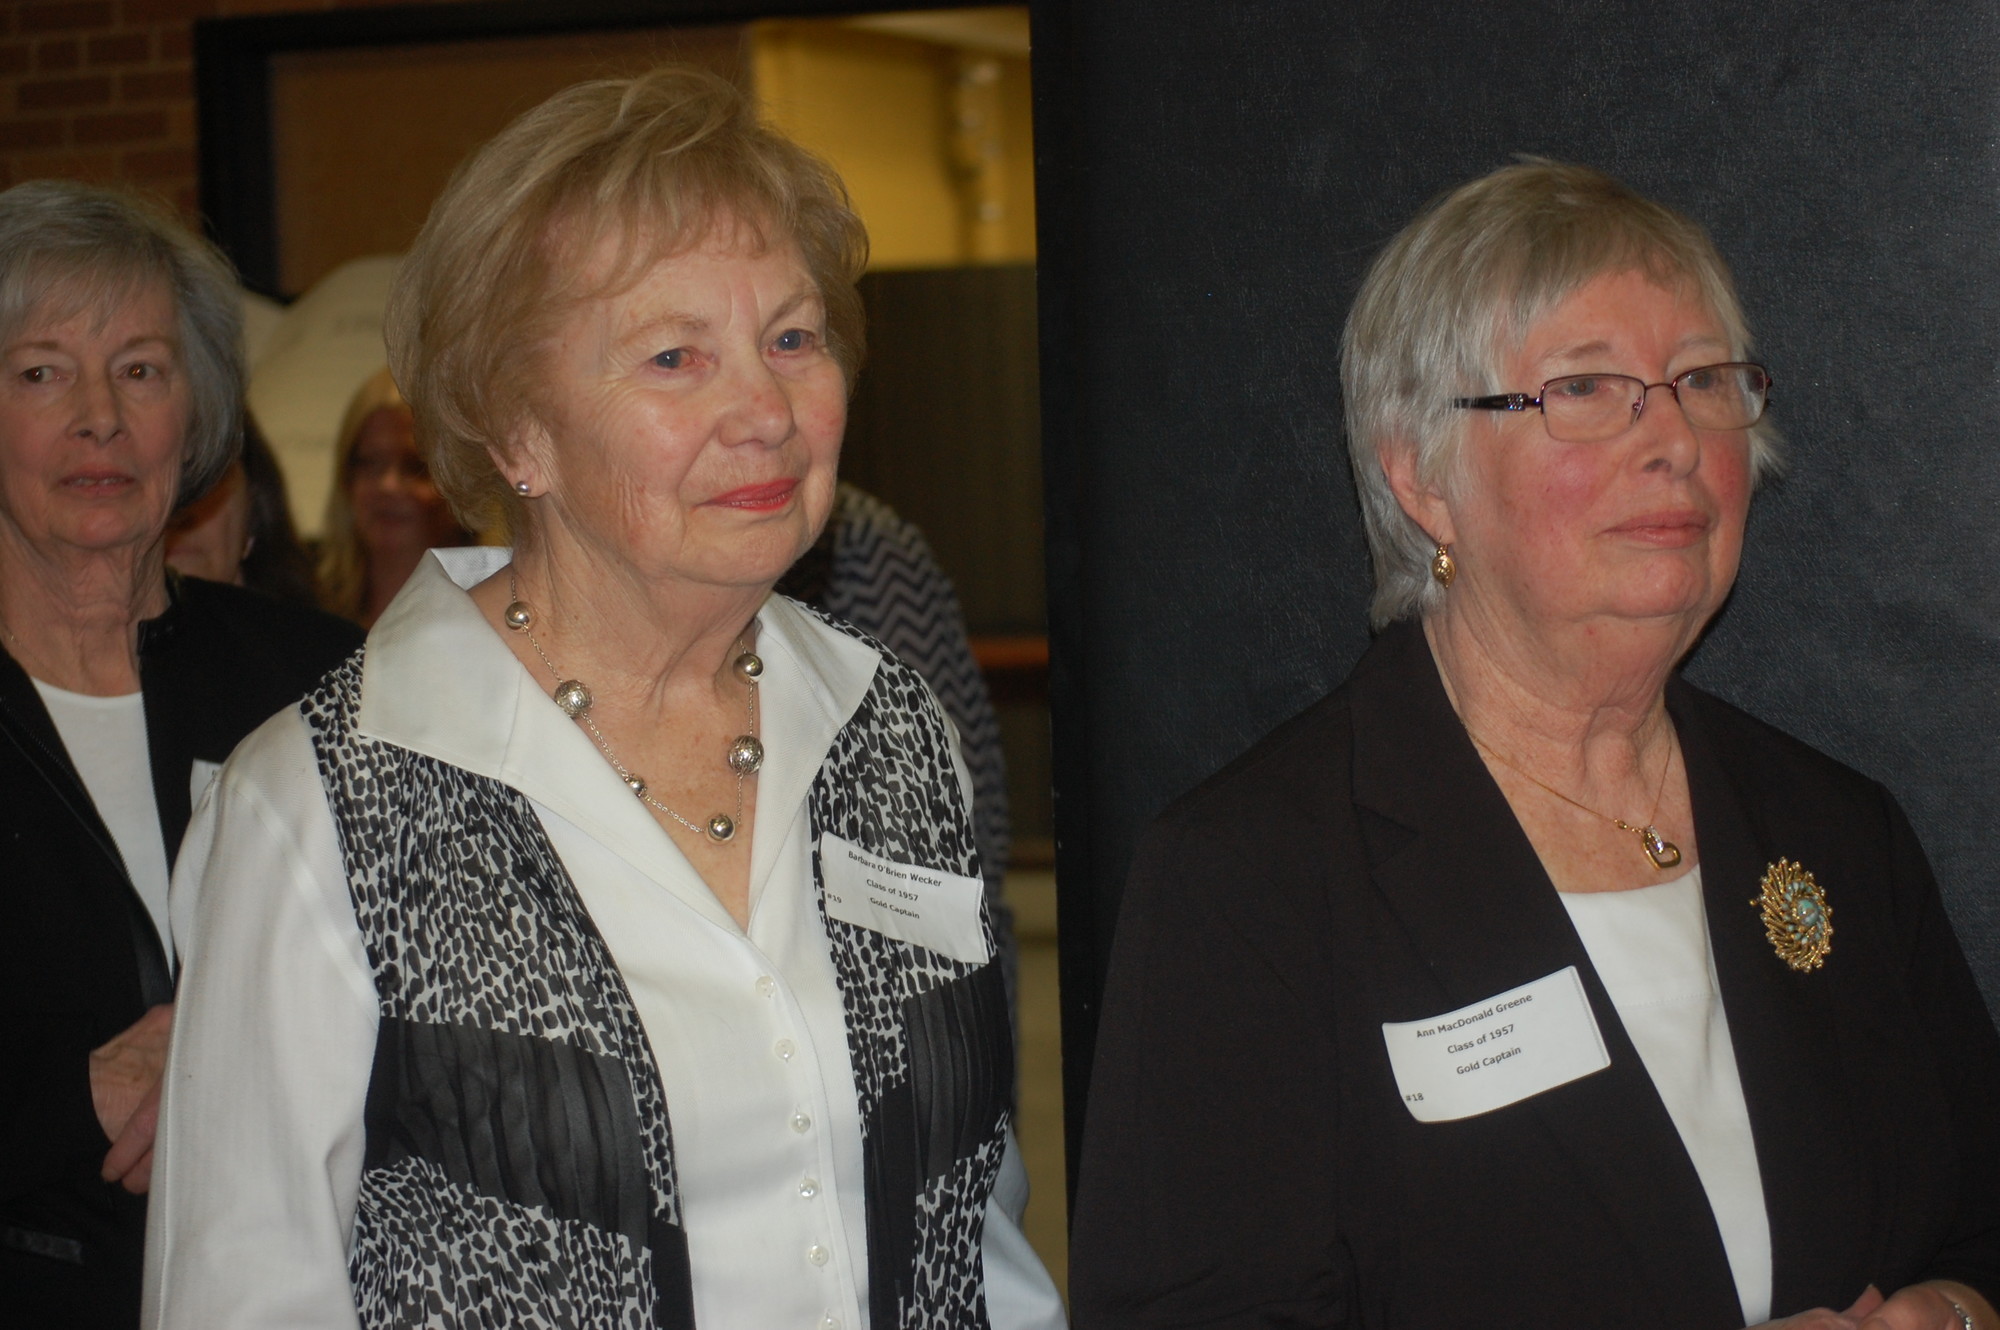 Barbara Wecker, left, and Ann Greene were captains of the 1957 Gold team.